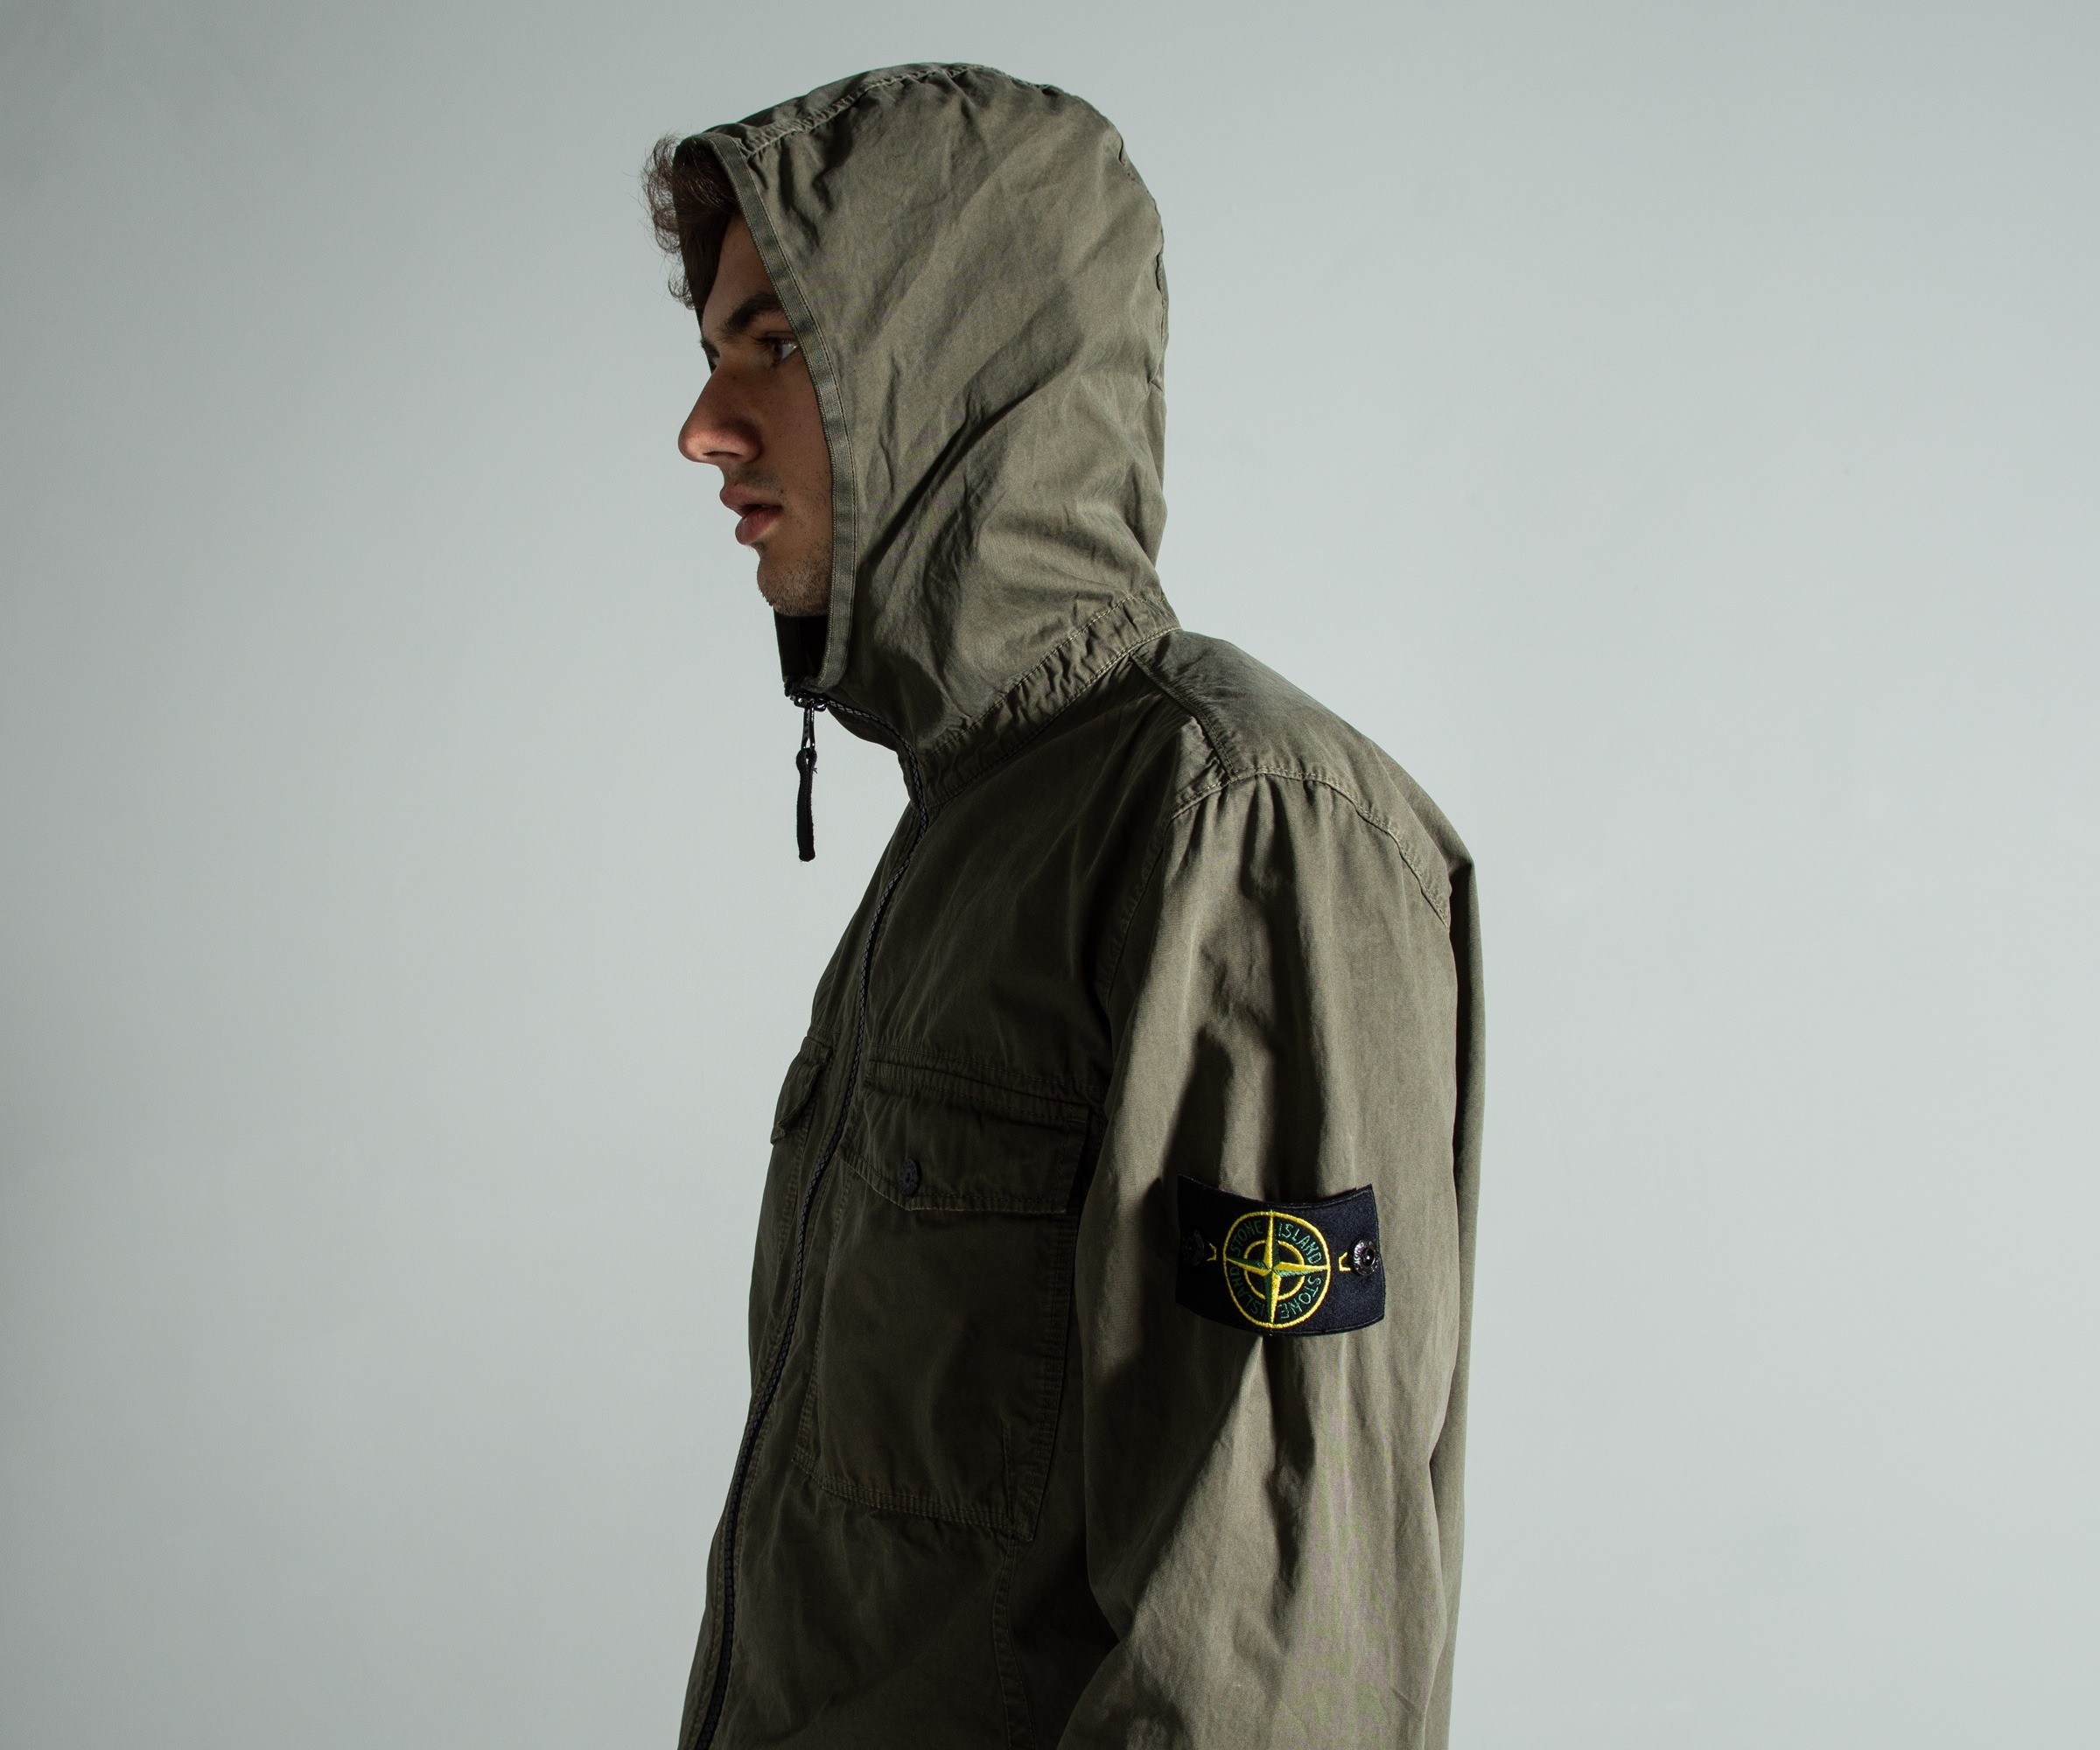 Stone Island 'OLD Effect' Hooded Overshirt Military Green